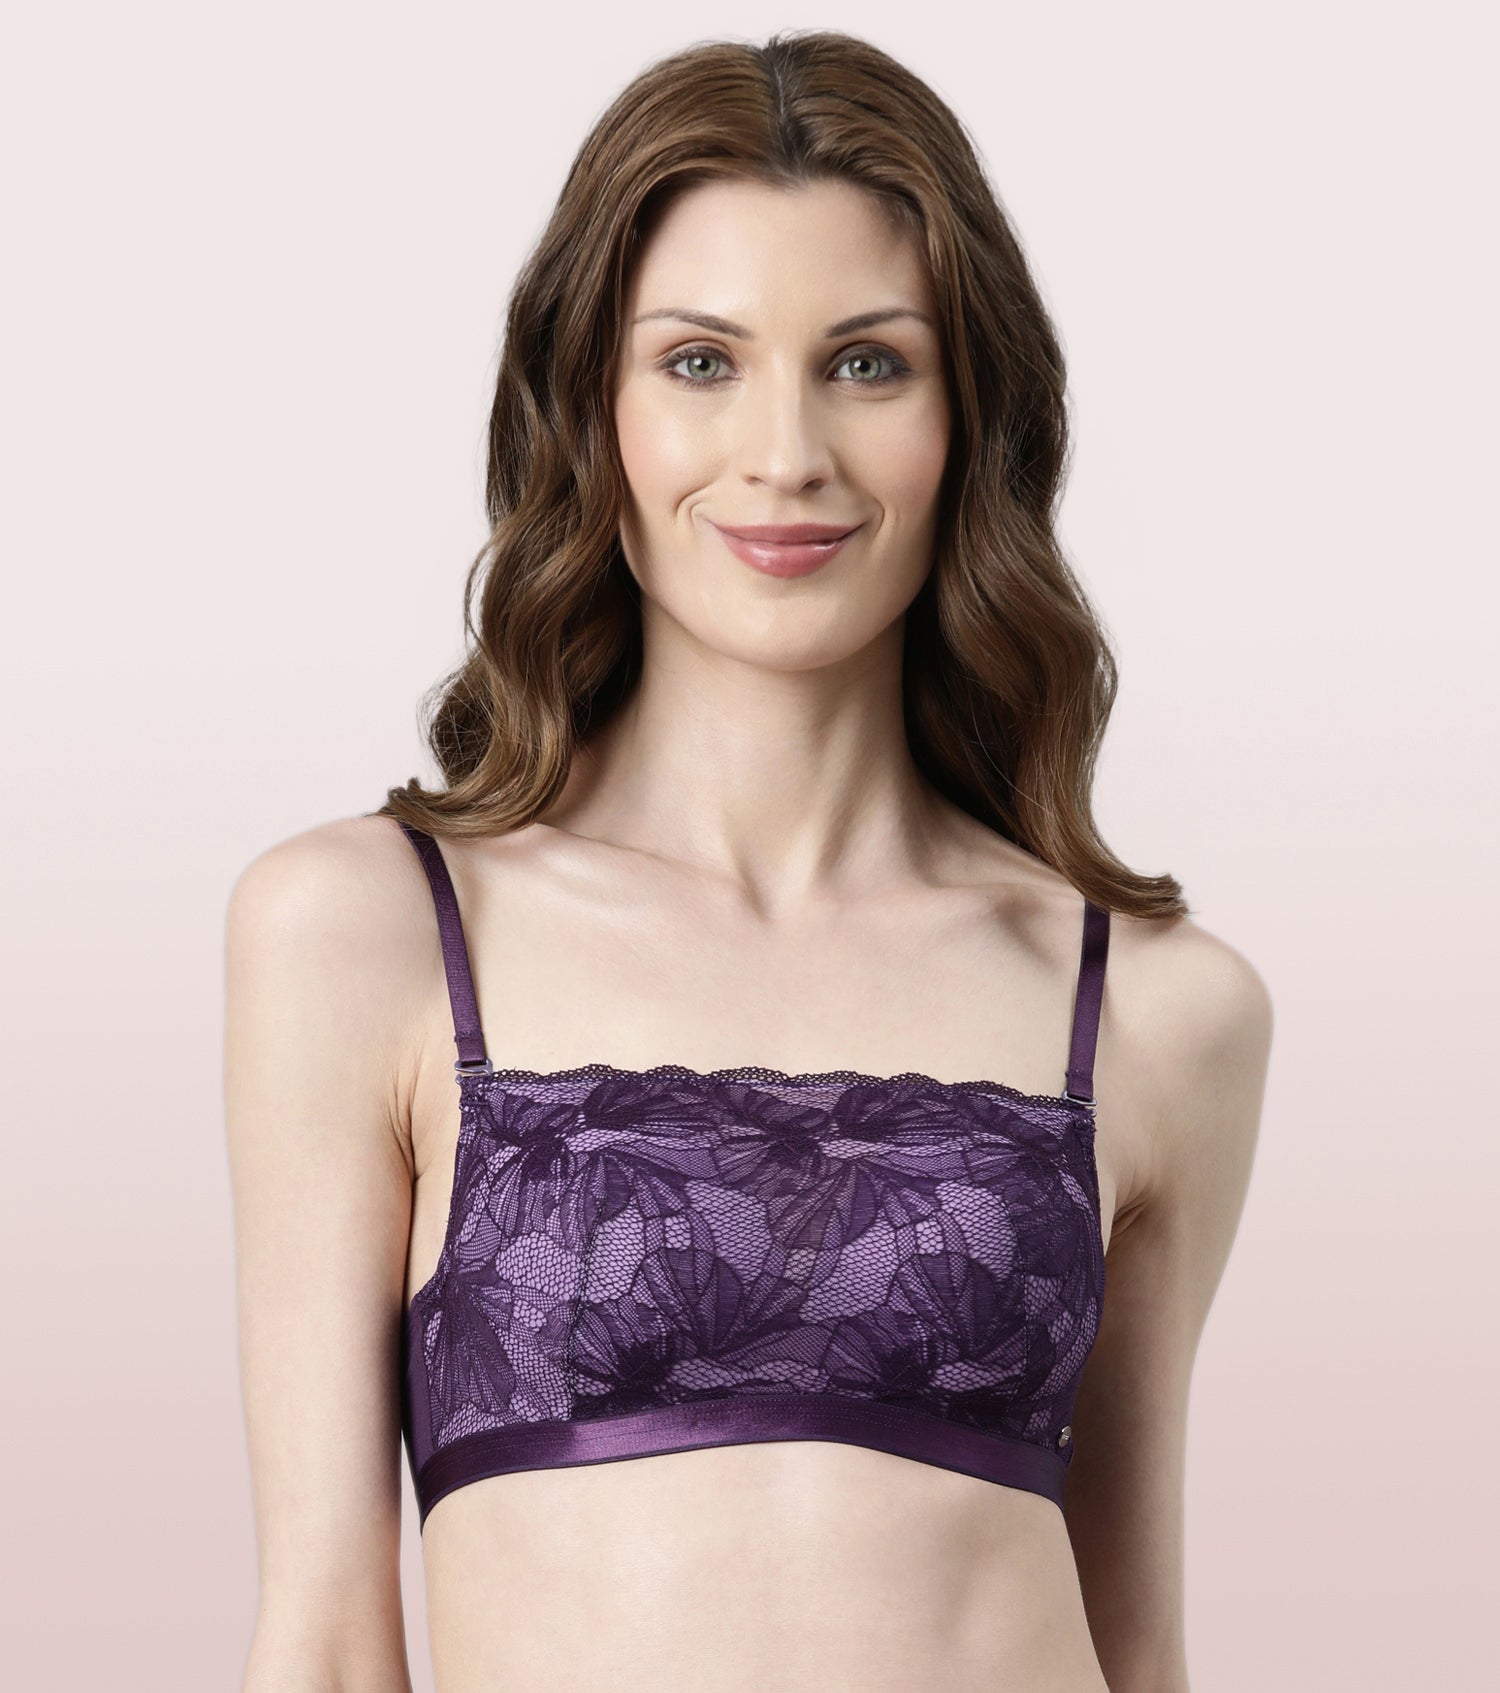 Enamor F068 Pushup Bra Padded Wired in Bangalore at best price by Gokaldas  Images Pvt Ltd (Head Office) - Justdial